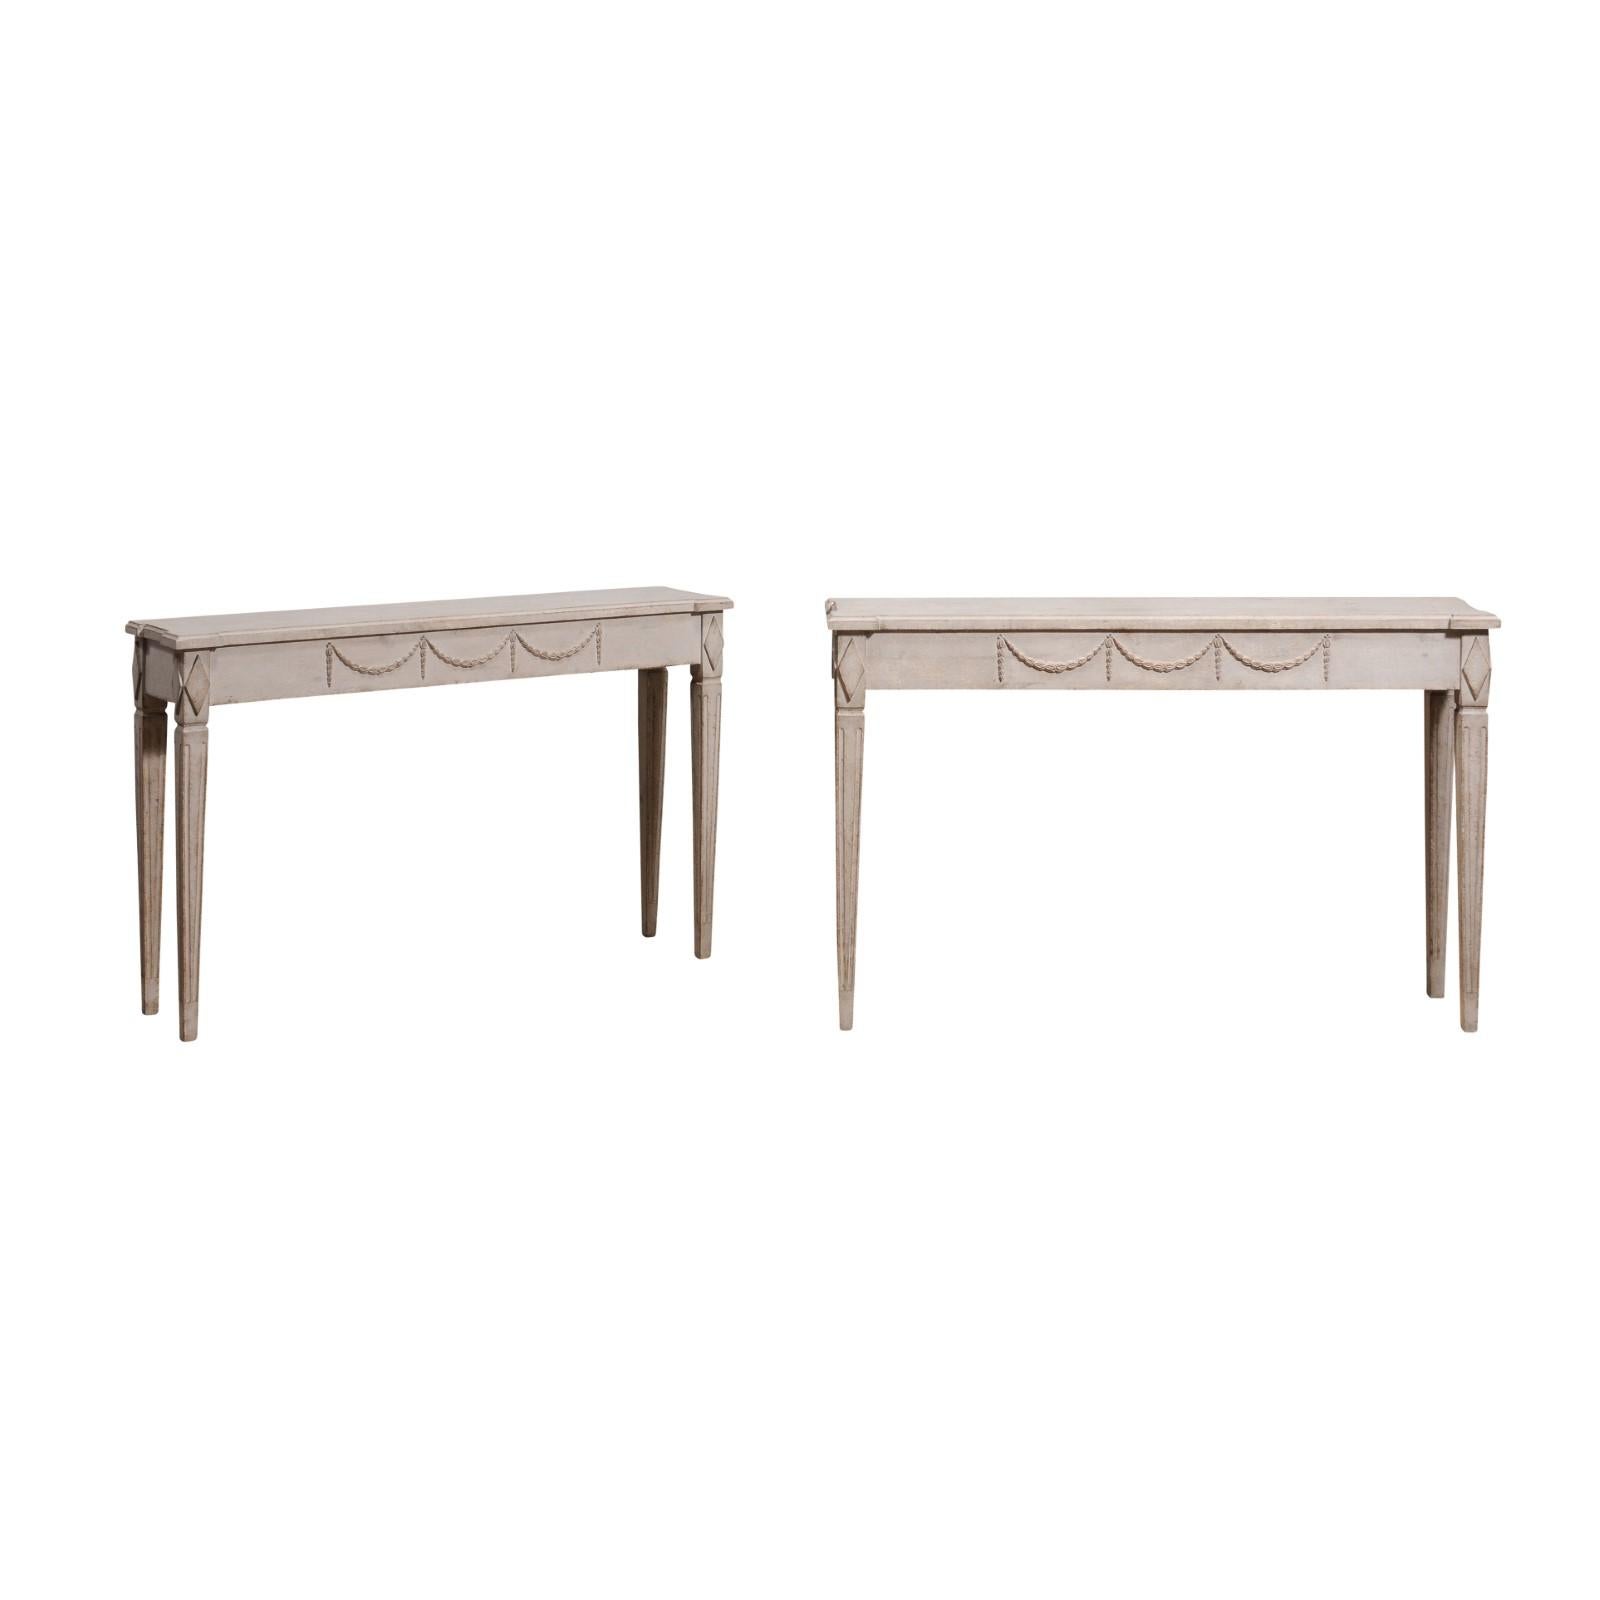 A pair of Swedish Gustavian period console tables from circa 1810 with light gray painted finish, carved garlands and diamond motifs, and tapered fluted legs. This exquisite pair of Swedish Gustavian period console tables, dating back to circa 1810,